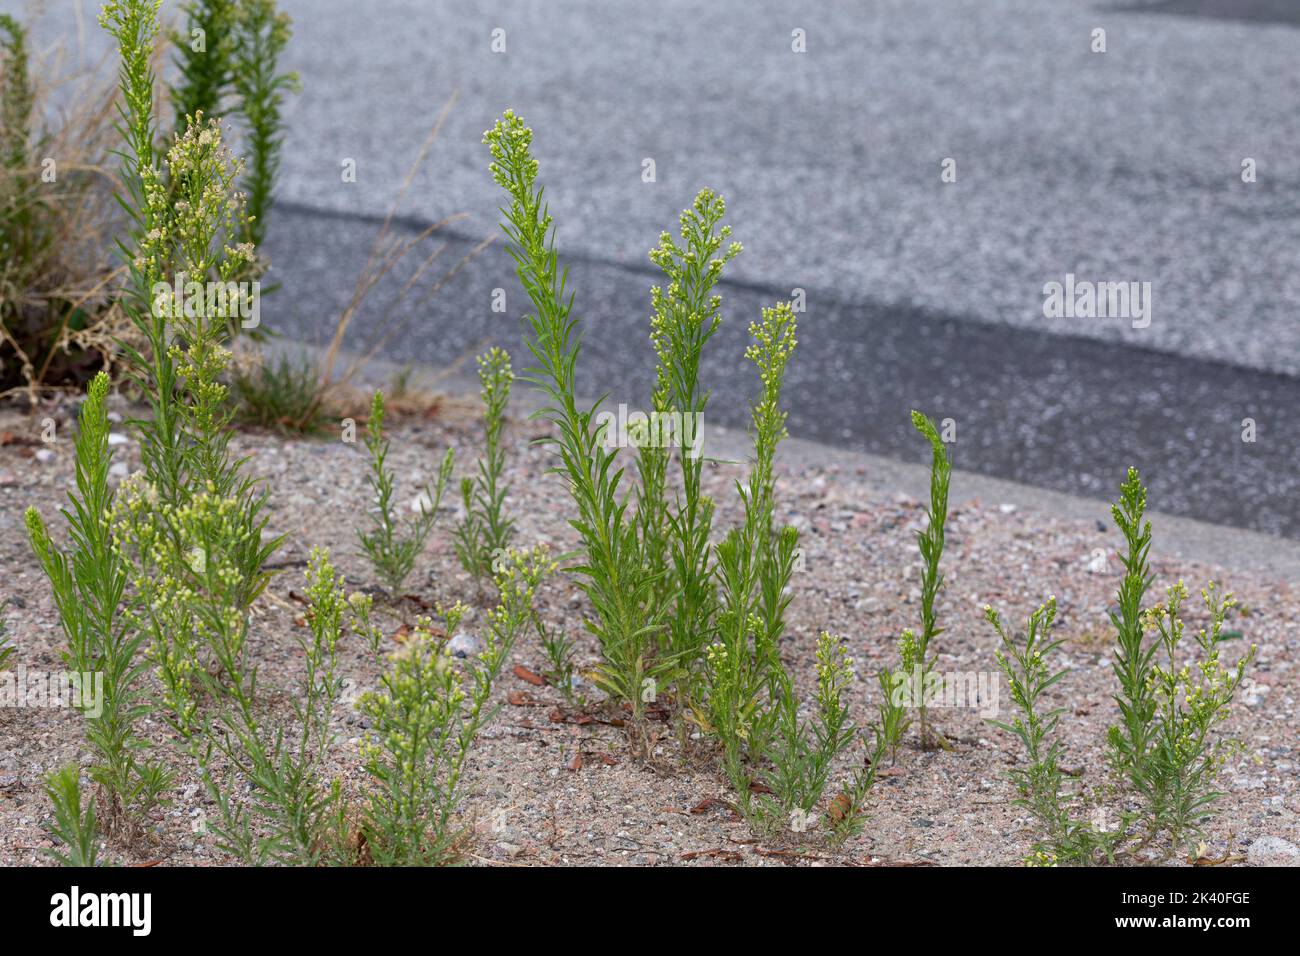 horseweed, Canadian fleabane (Conyza canadensis, Erigeron canadensis), growing on a pavement, Germany Stock Photo